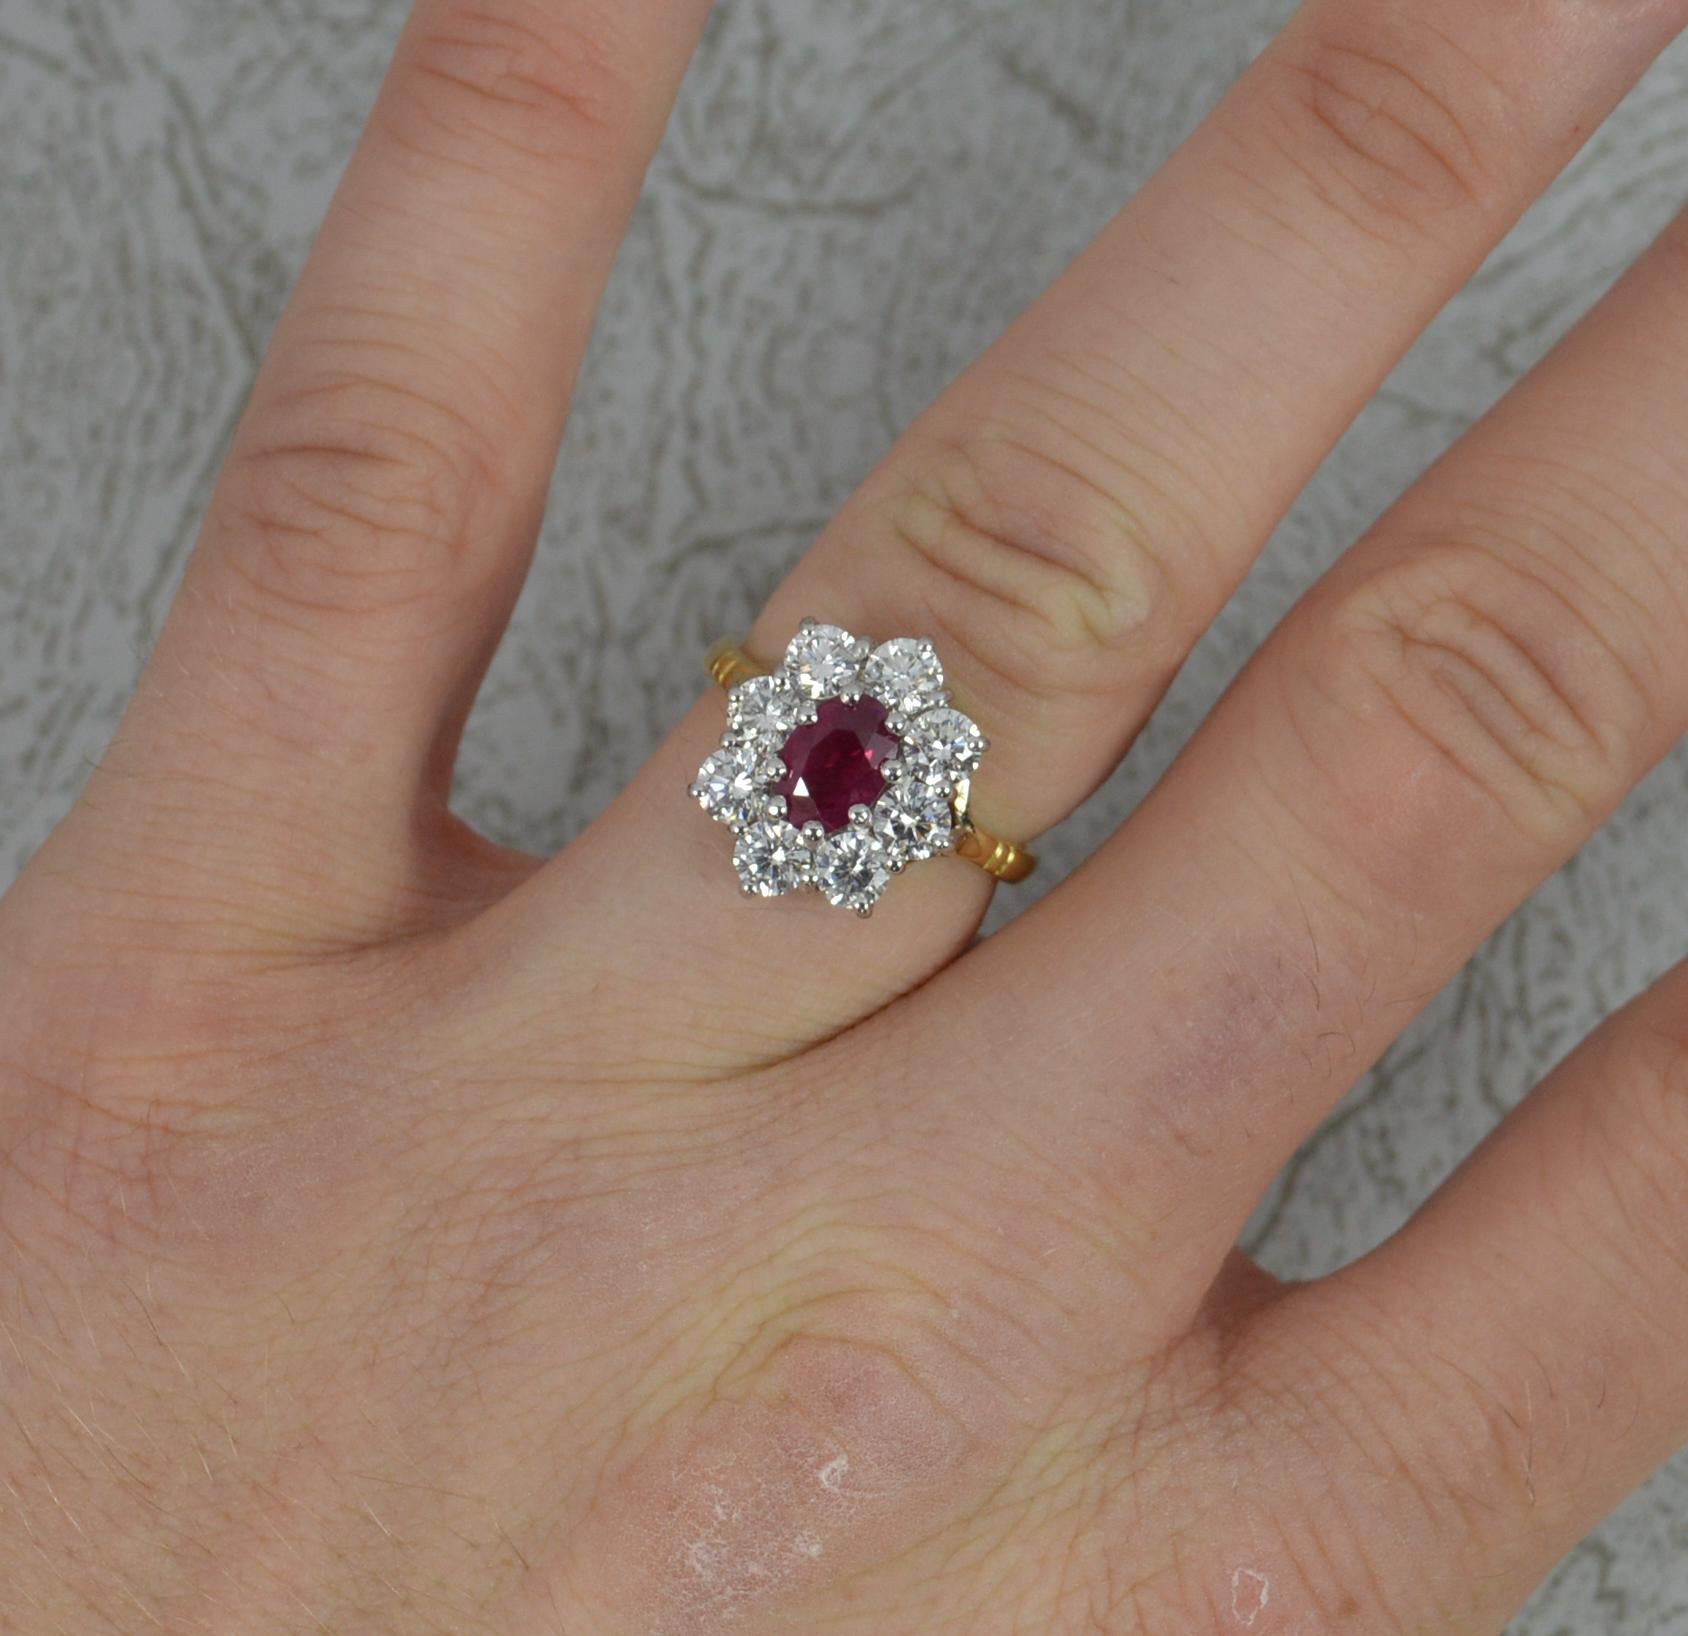 A stunning ladies cluster ring.
Modelled in 18 carat yellow gold with a white gold head.
Set with a single oval shaped ruby to centre, 5mm x 7.2mm approx. Surrounding are eight natural round brilliant cut diamonds.
Total diamond carat weight of 1.60